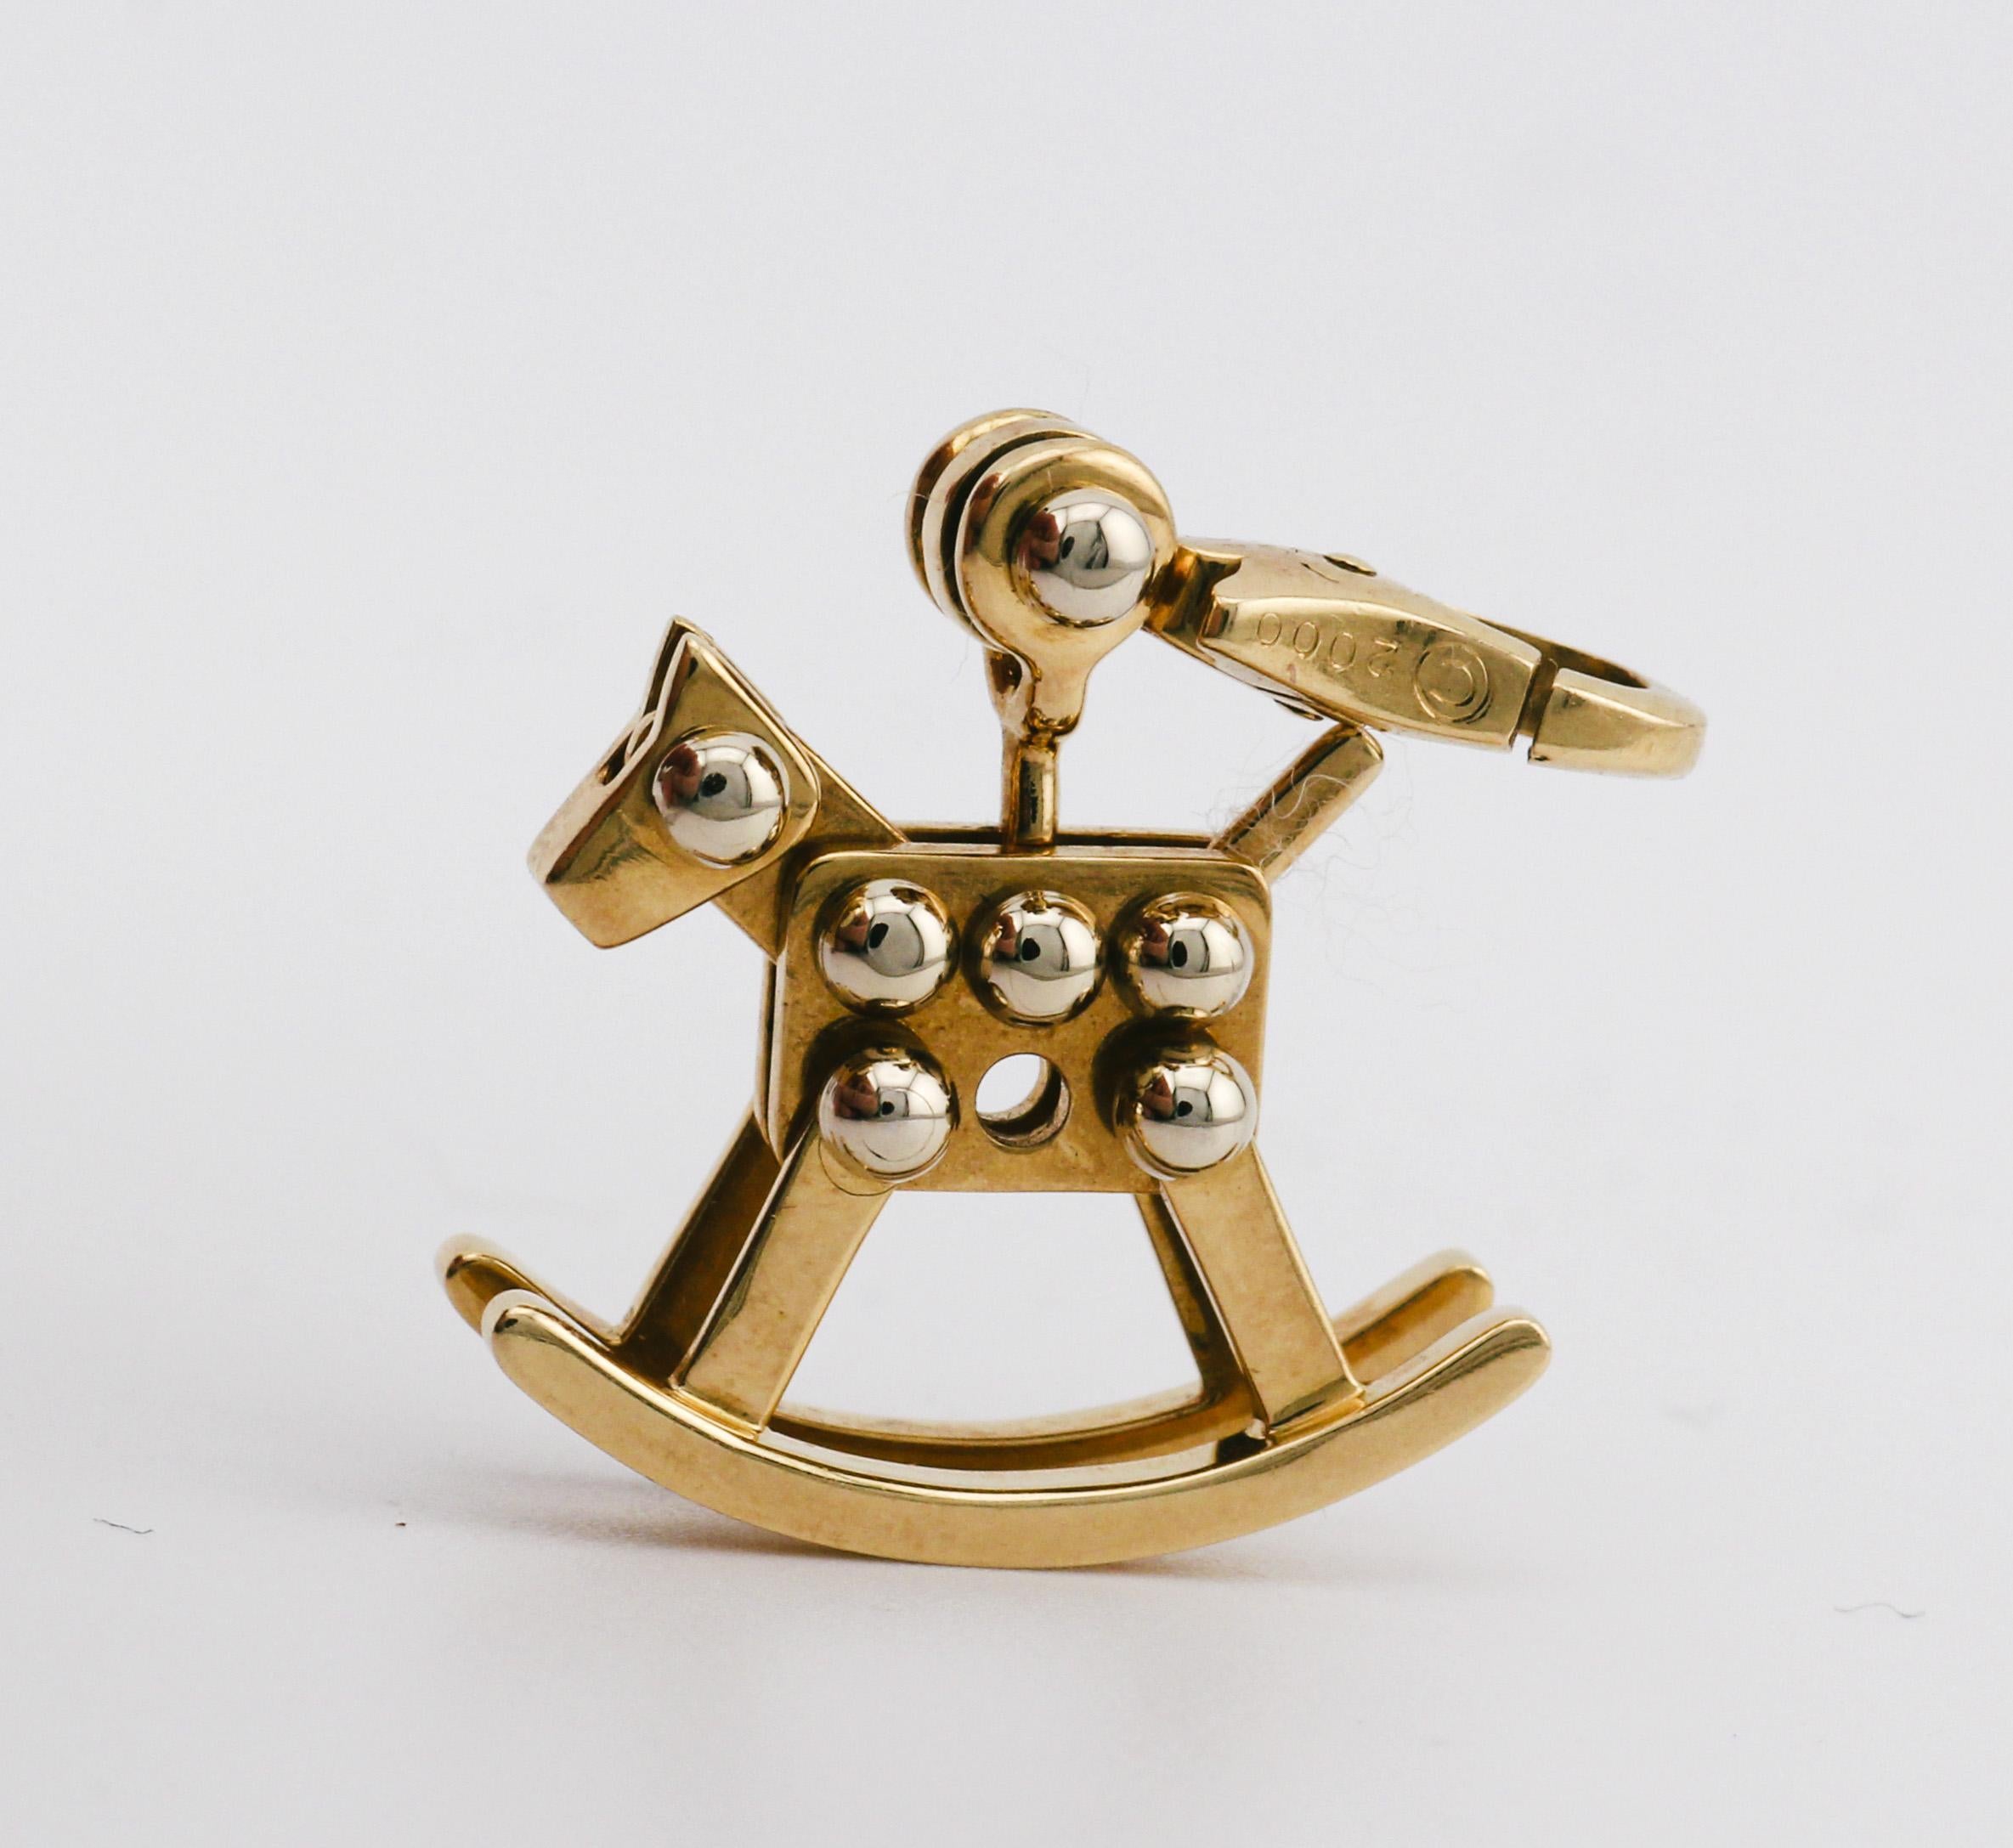 Cartier 18K White & Yellow Gold Rocking Horse Charm Pendant In Good Condition For Sale In Bellmore, NY